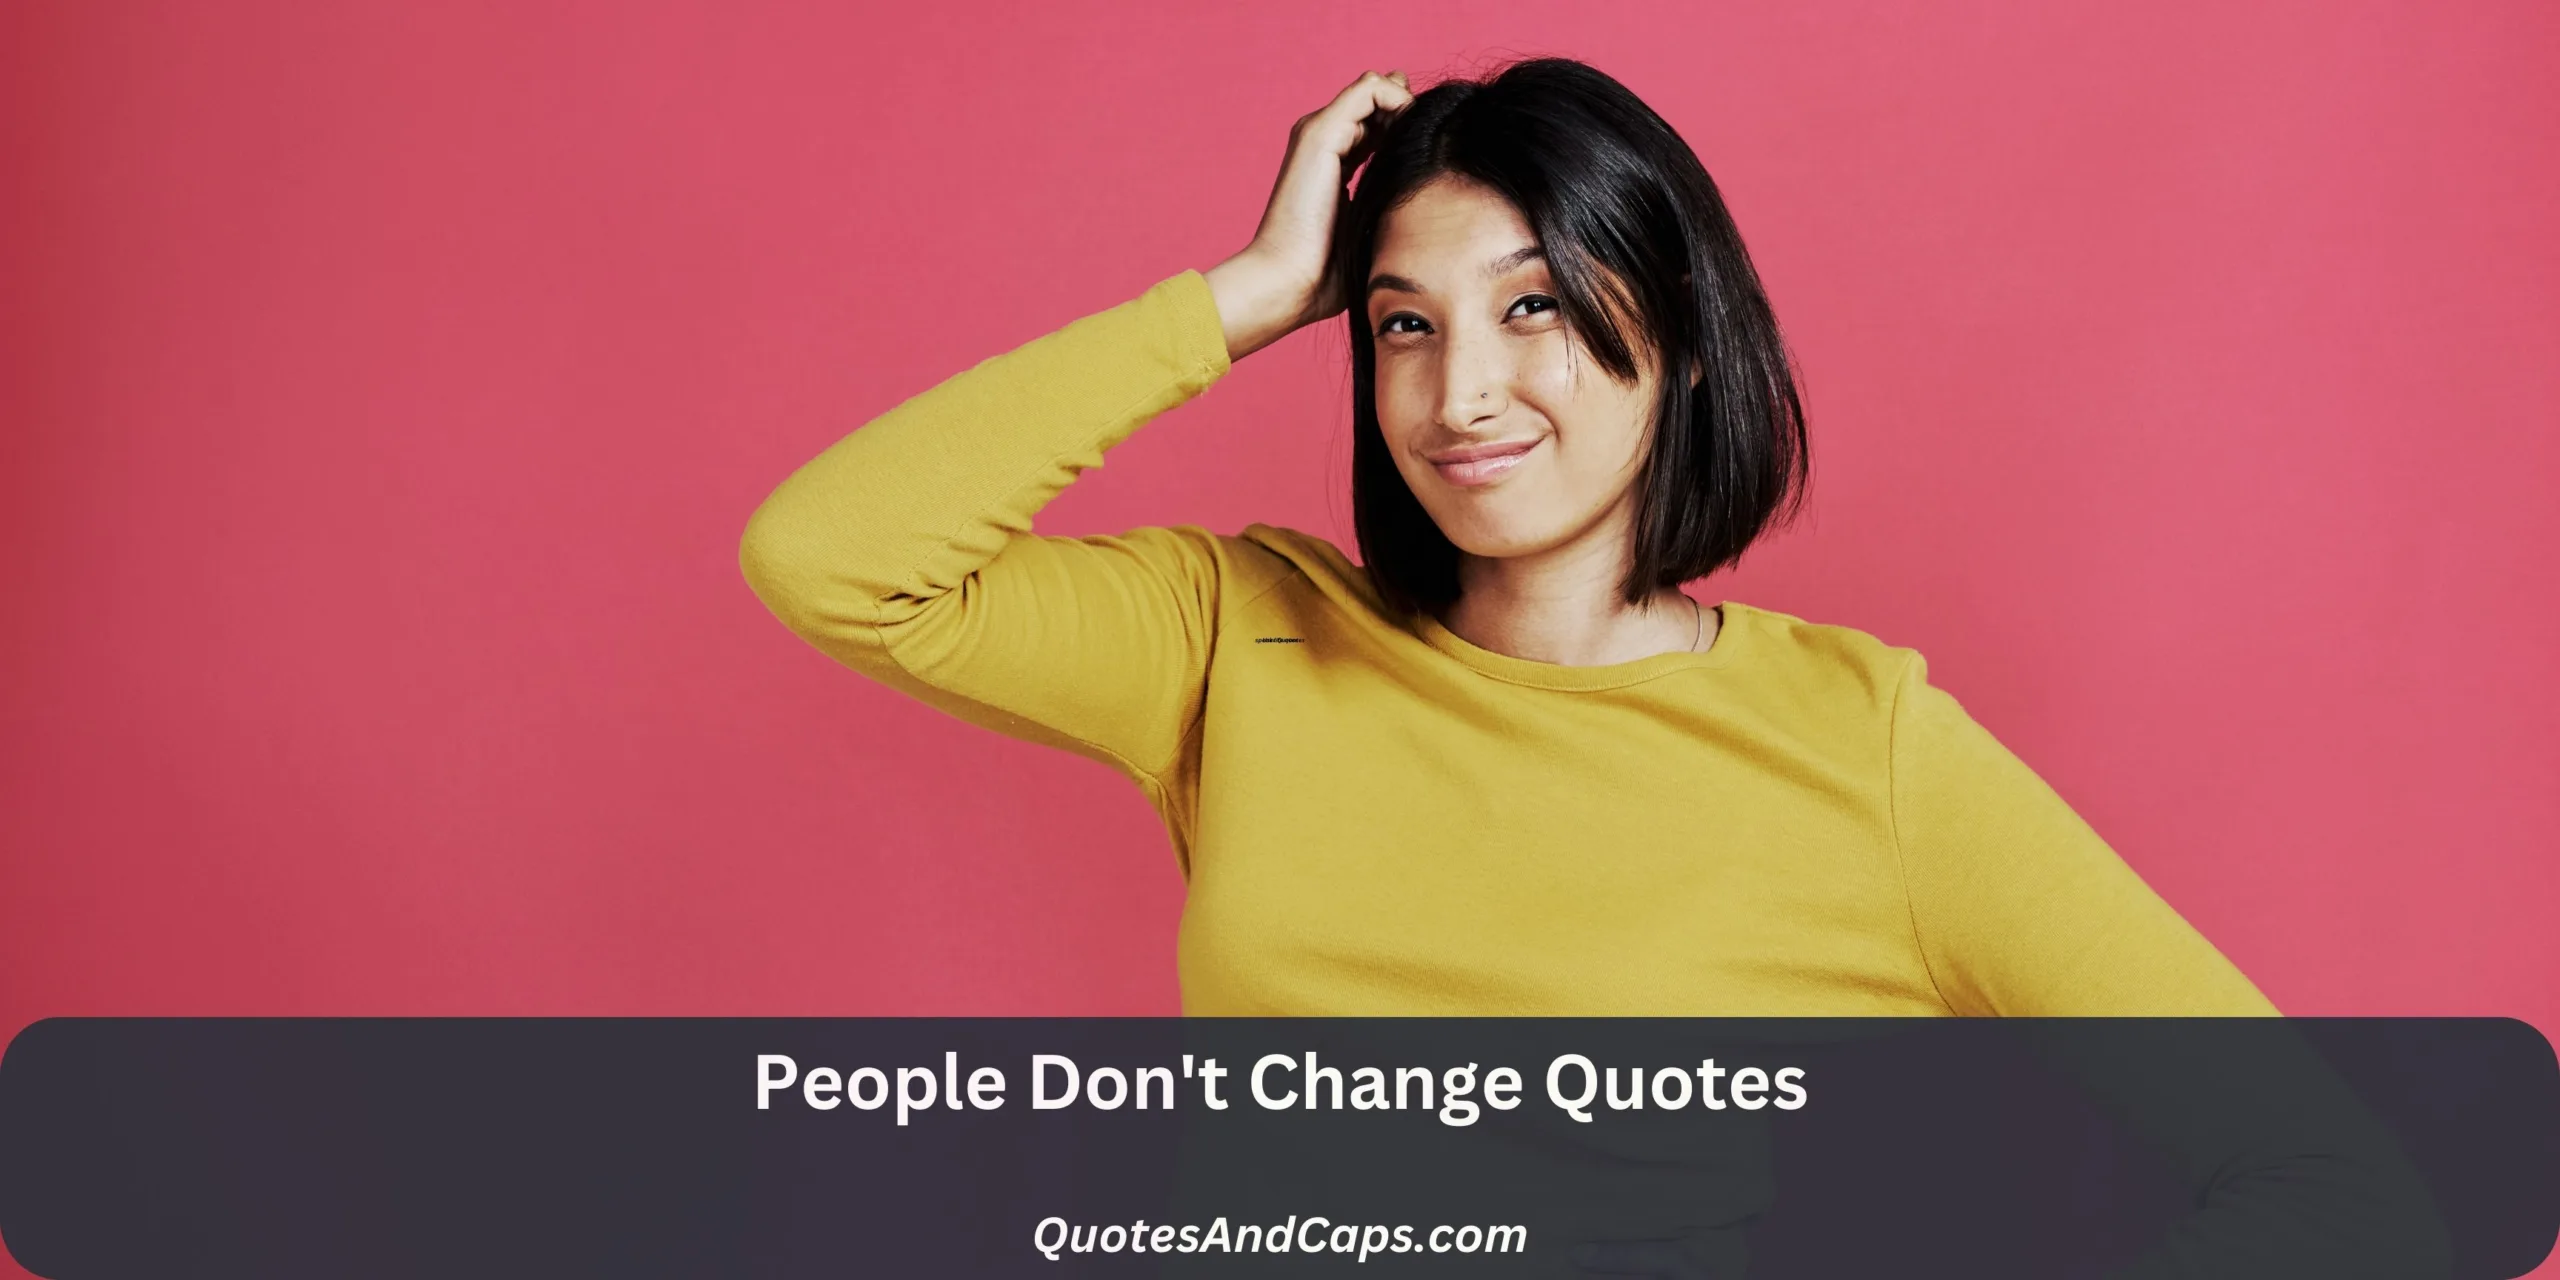 People Don’t Change Quotes